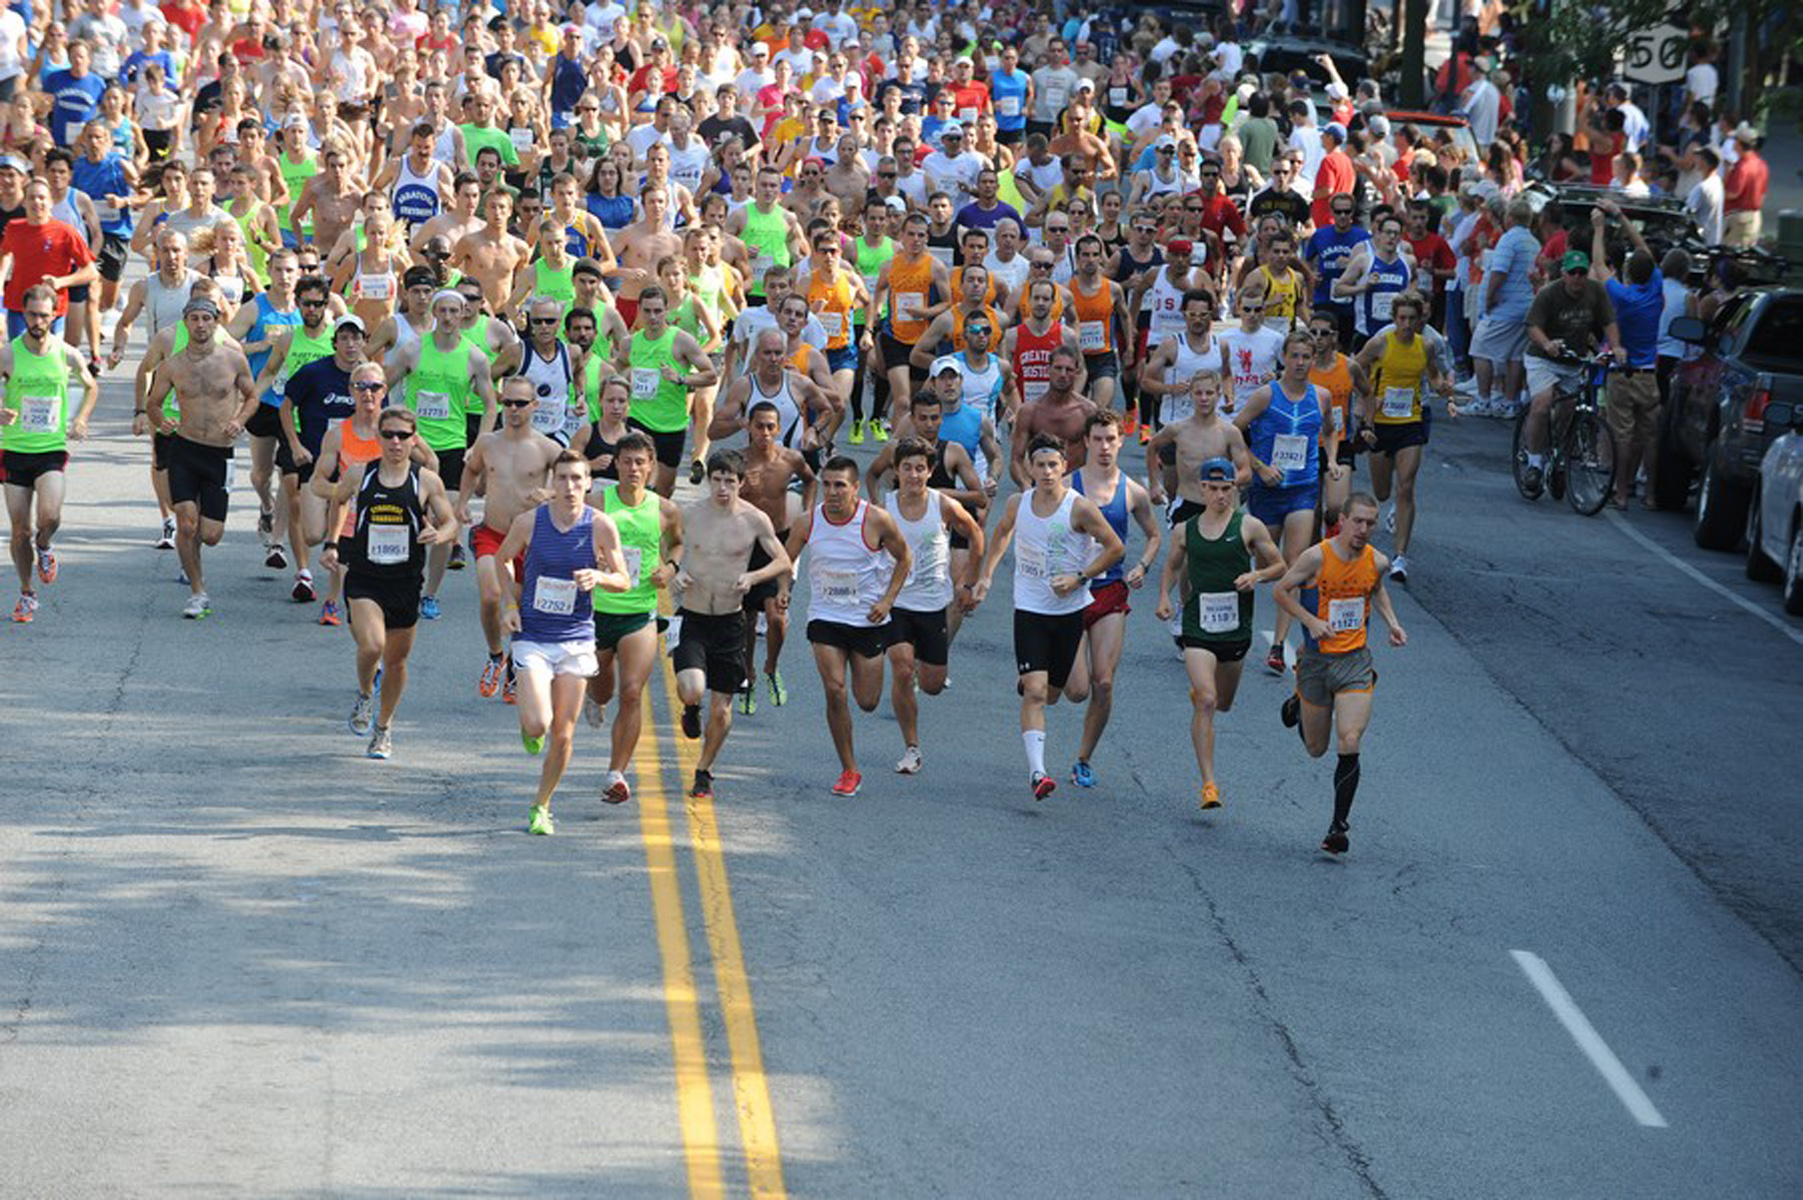 Firecracker4 Road Race Again A Feature Of Saratoga's Fourth Of July